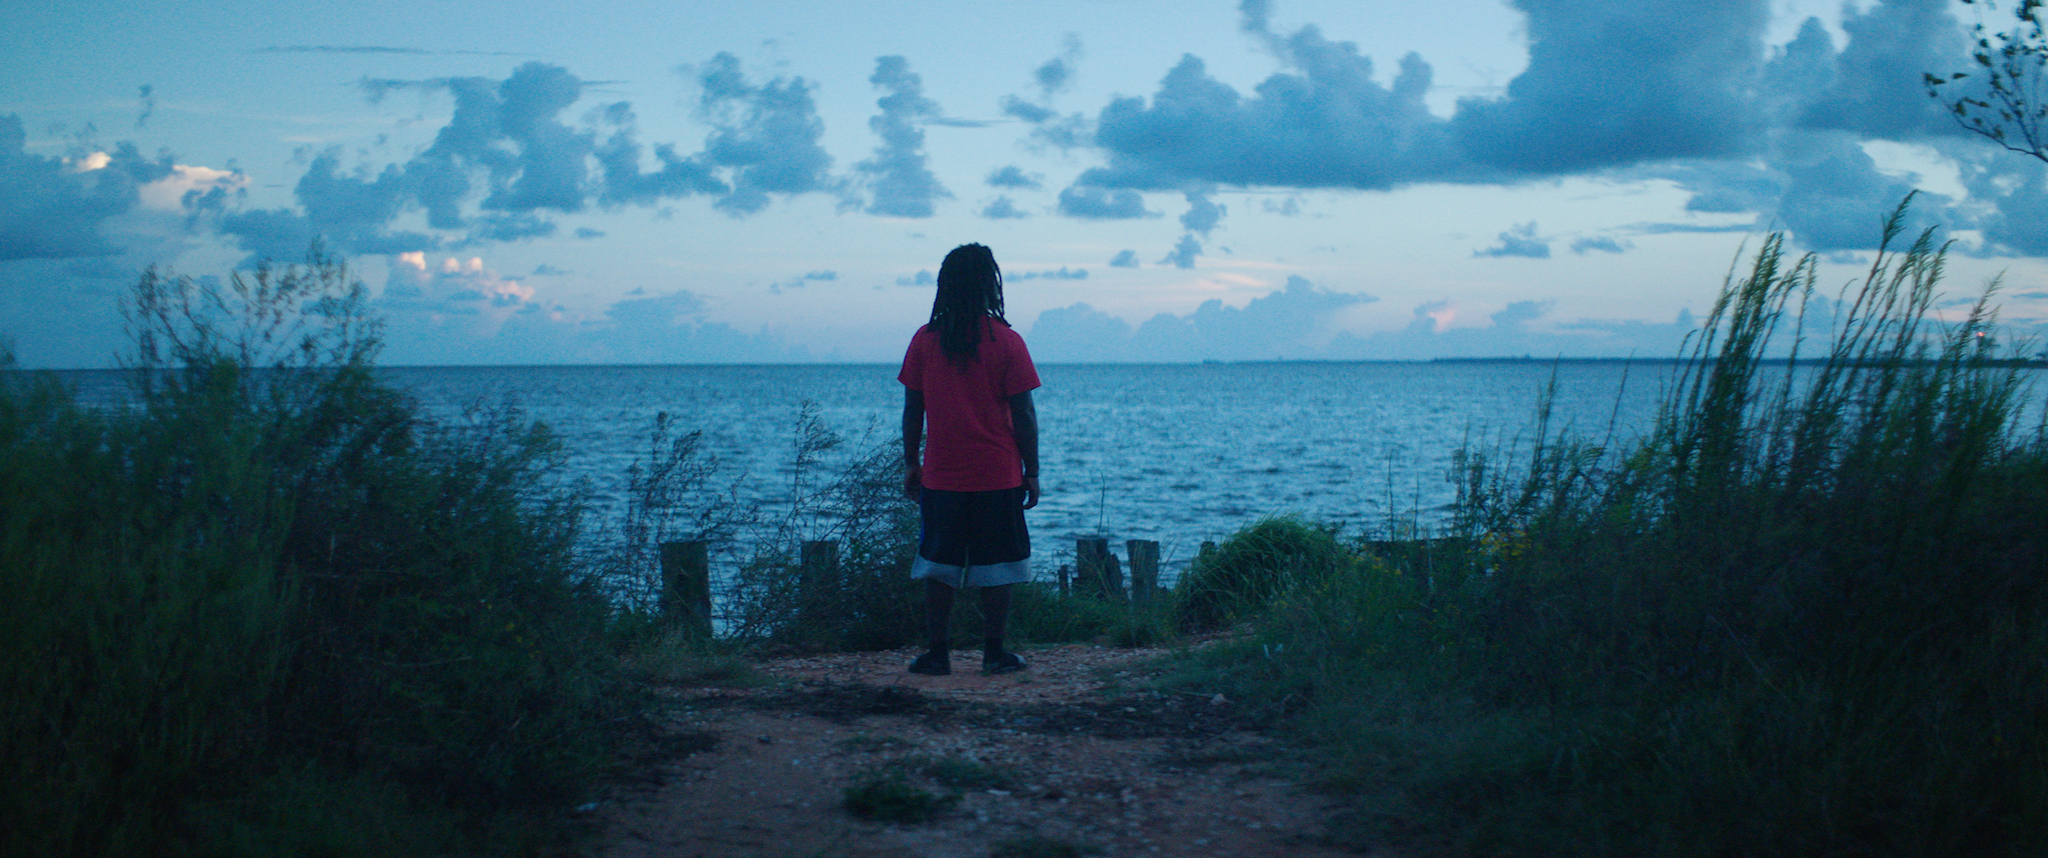 A Black man with dreadlocks stands facing a sunset over the ocean.